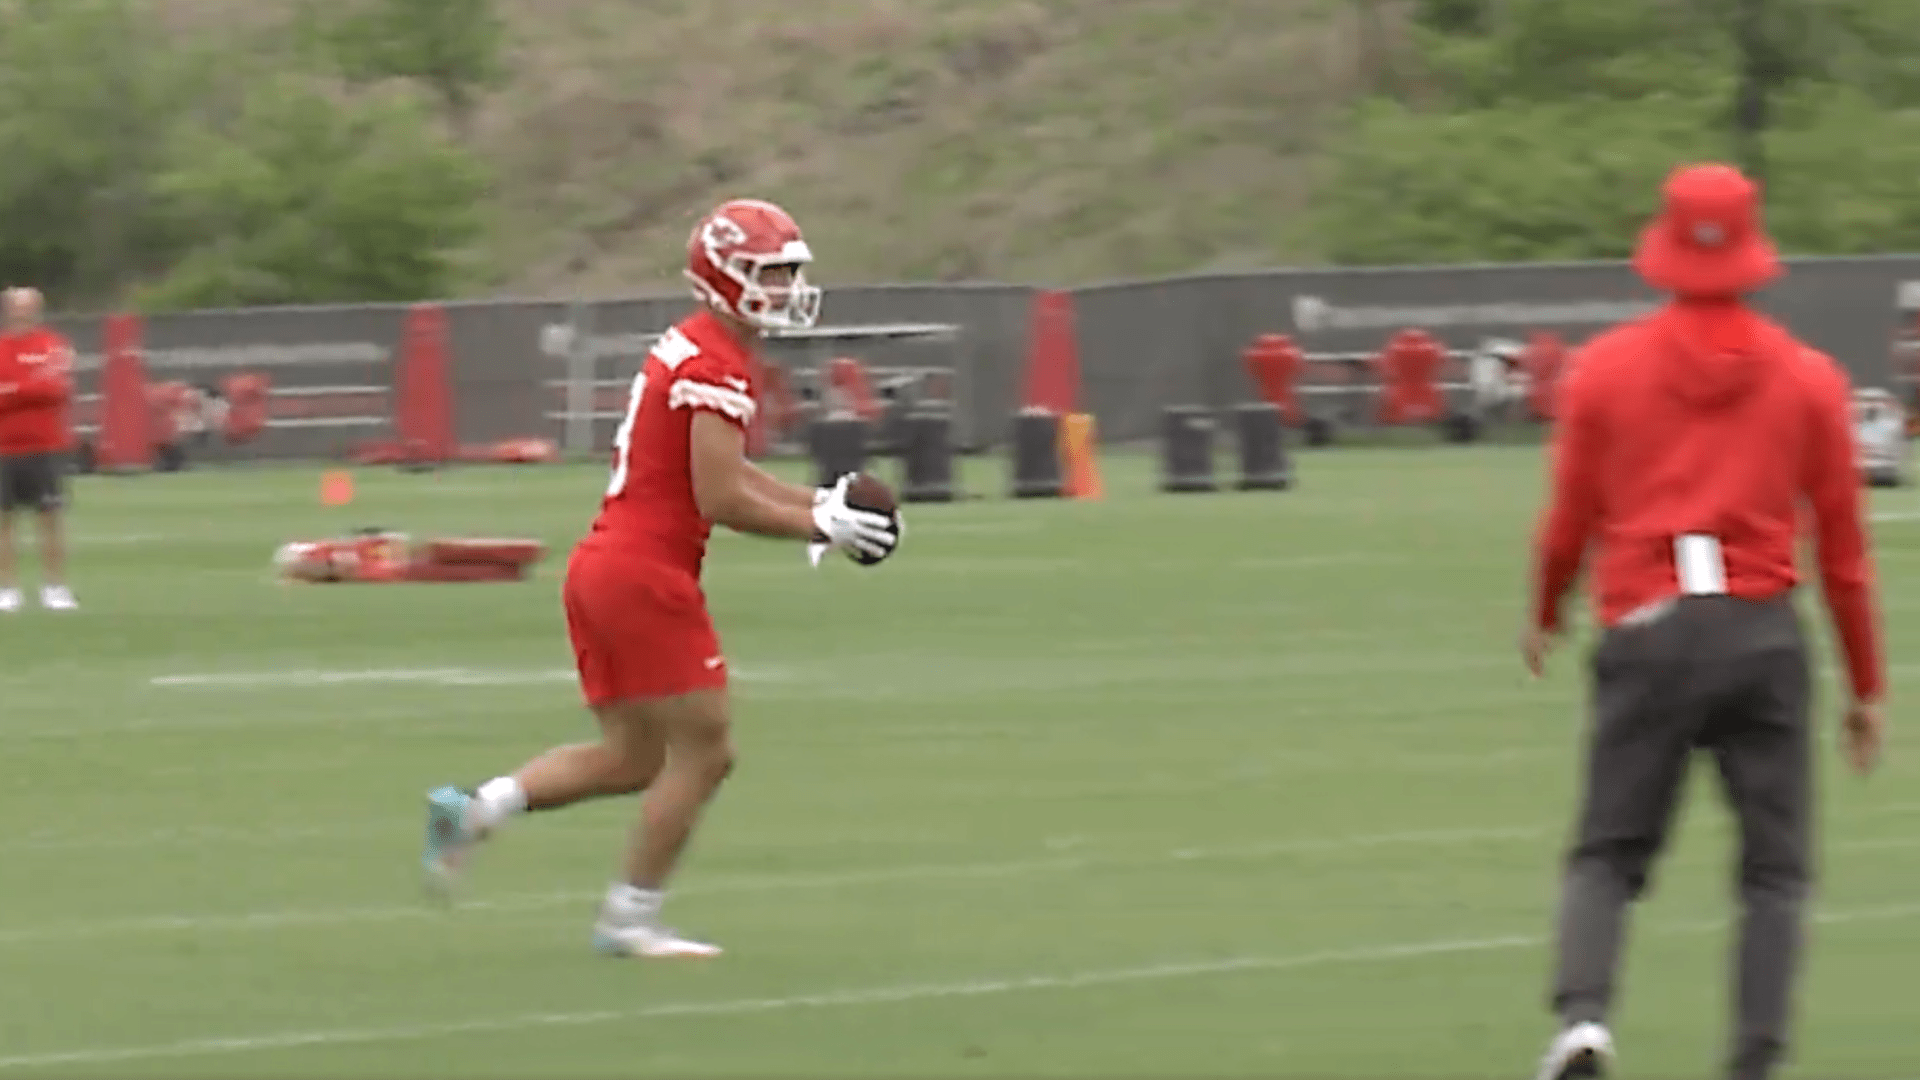 Chiefs fans convinced they've spotted Mahomes' next secret trick play in action